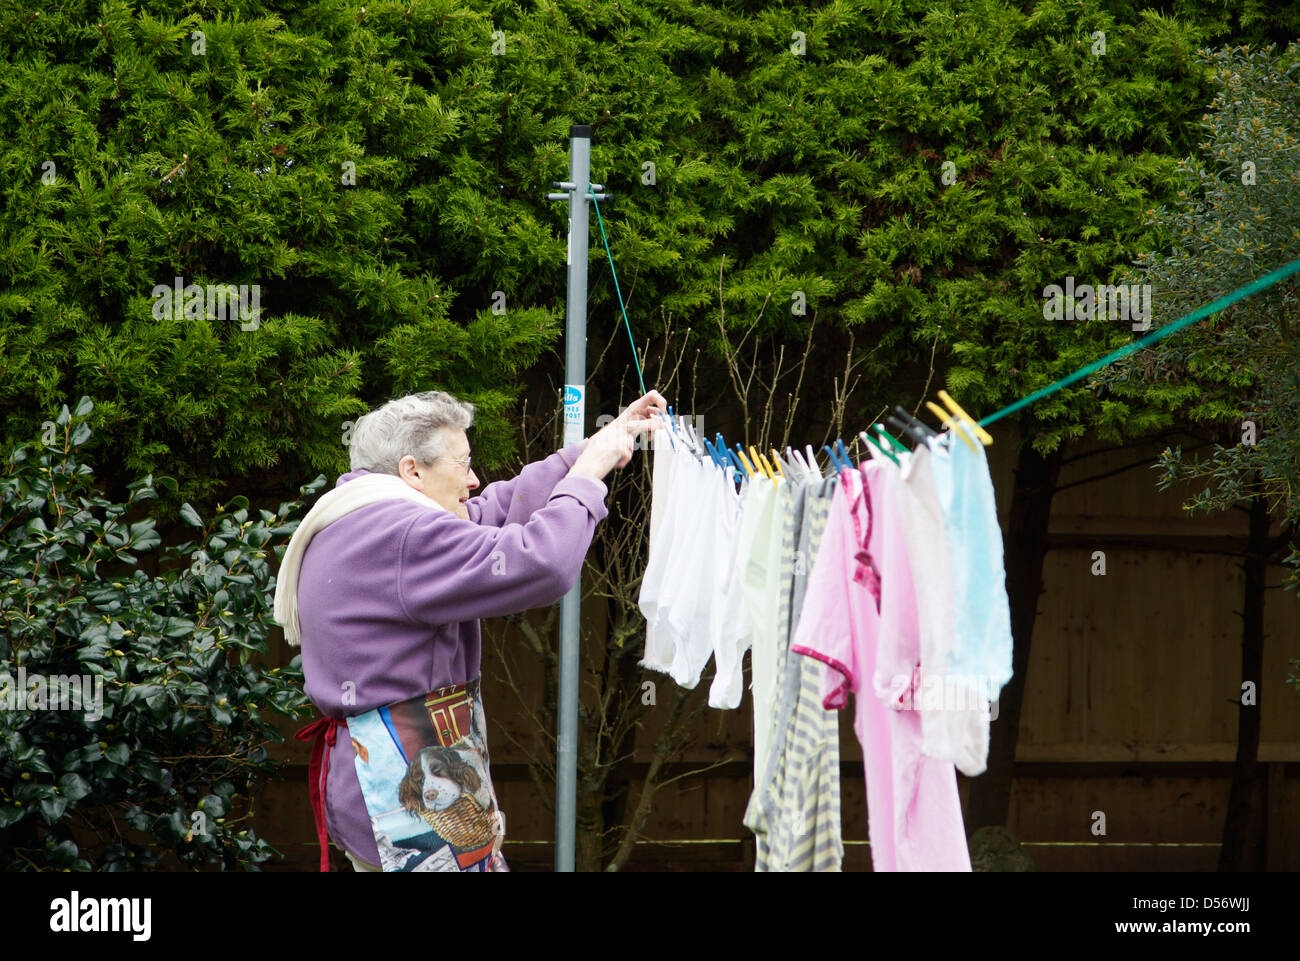 Elderly woman hanging out washed clothes for natural drying in the garden on a windy day Stock Photo